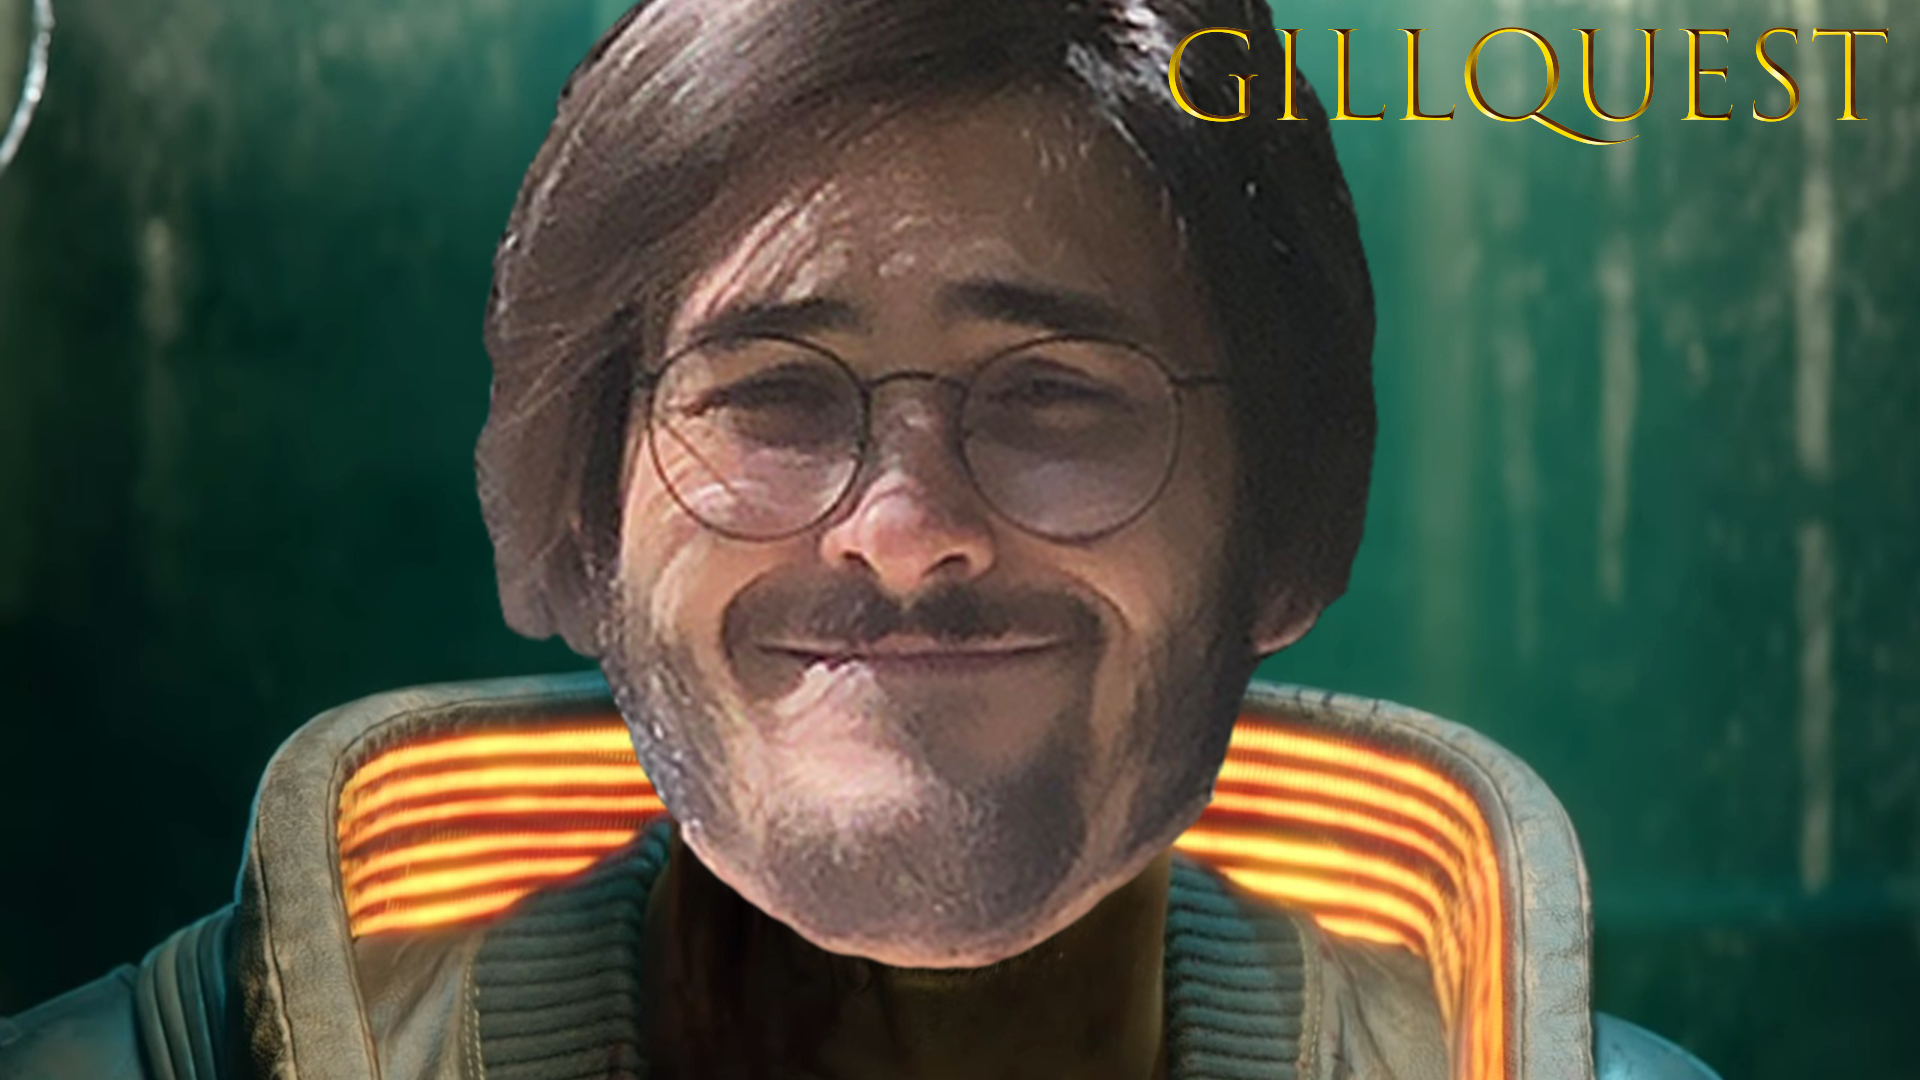 Gillquest